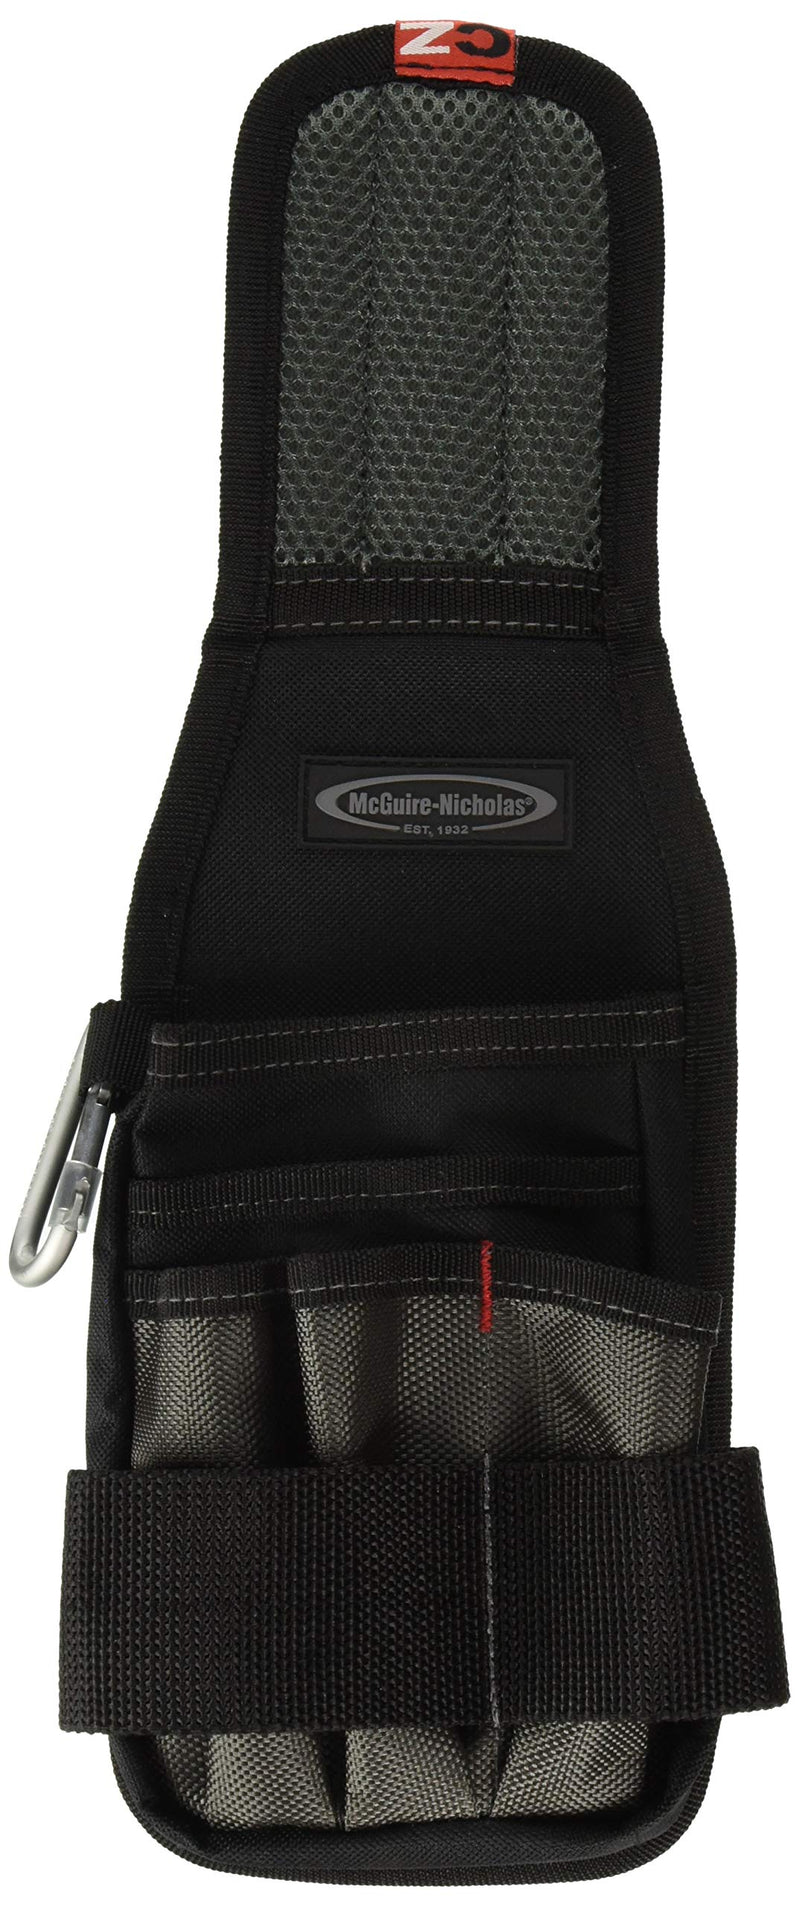 McGuire-Nicholas Quad Series Multi-Pocket Tool Holder | Durable Tool Storage with Webbing Loops and Grommet Carabiner | Attach to Front Pocket, Back Pocket, Belt Loop or Waistband - NewNest Australia